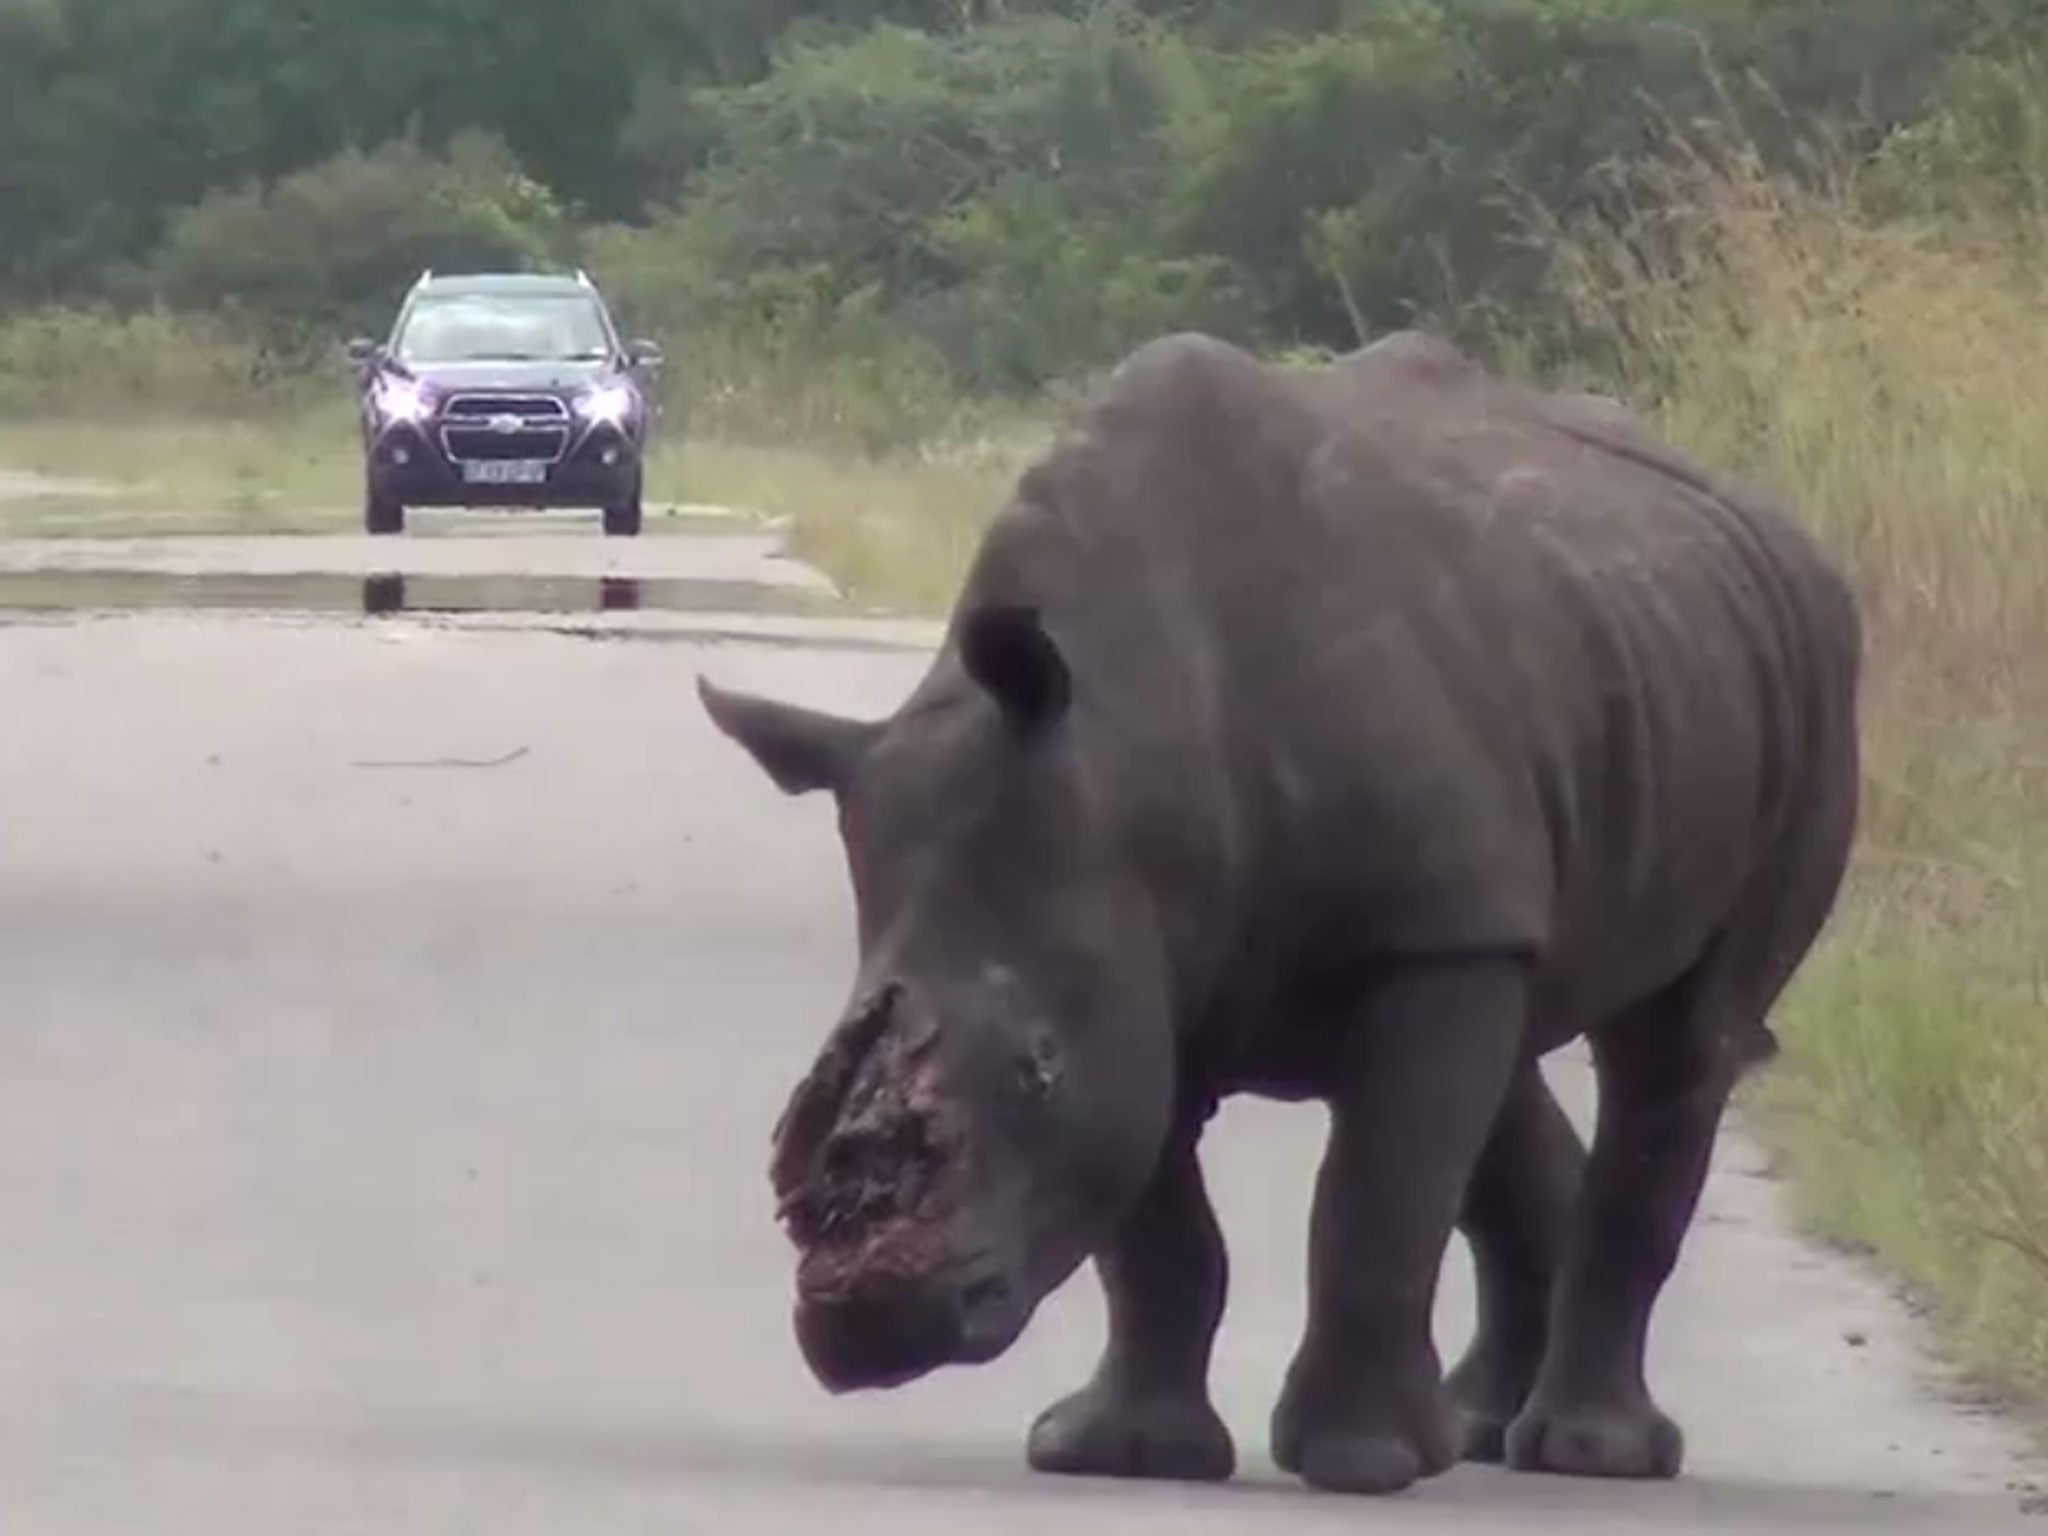 Visitors to the Kruger park uploaded footage of the mortally-wounded white rhino to YouTube, but it took five days before rangers could track it down and put it out of its misery